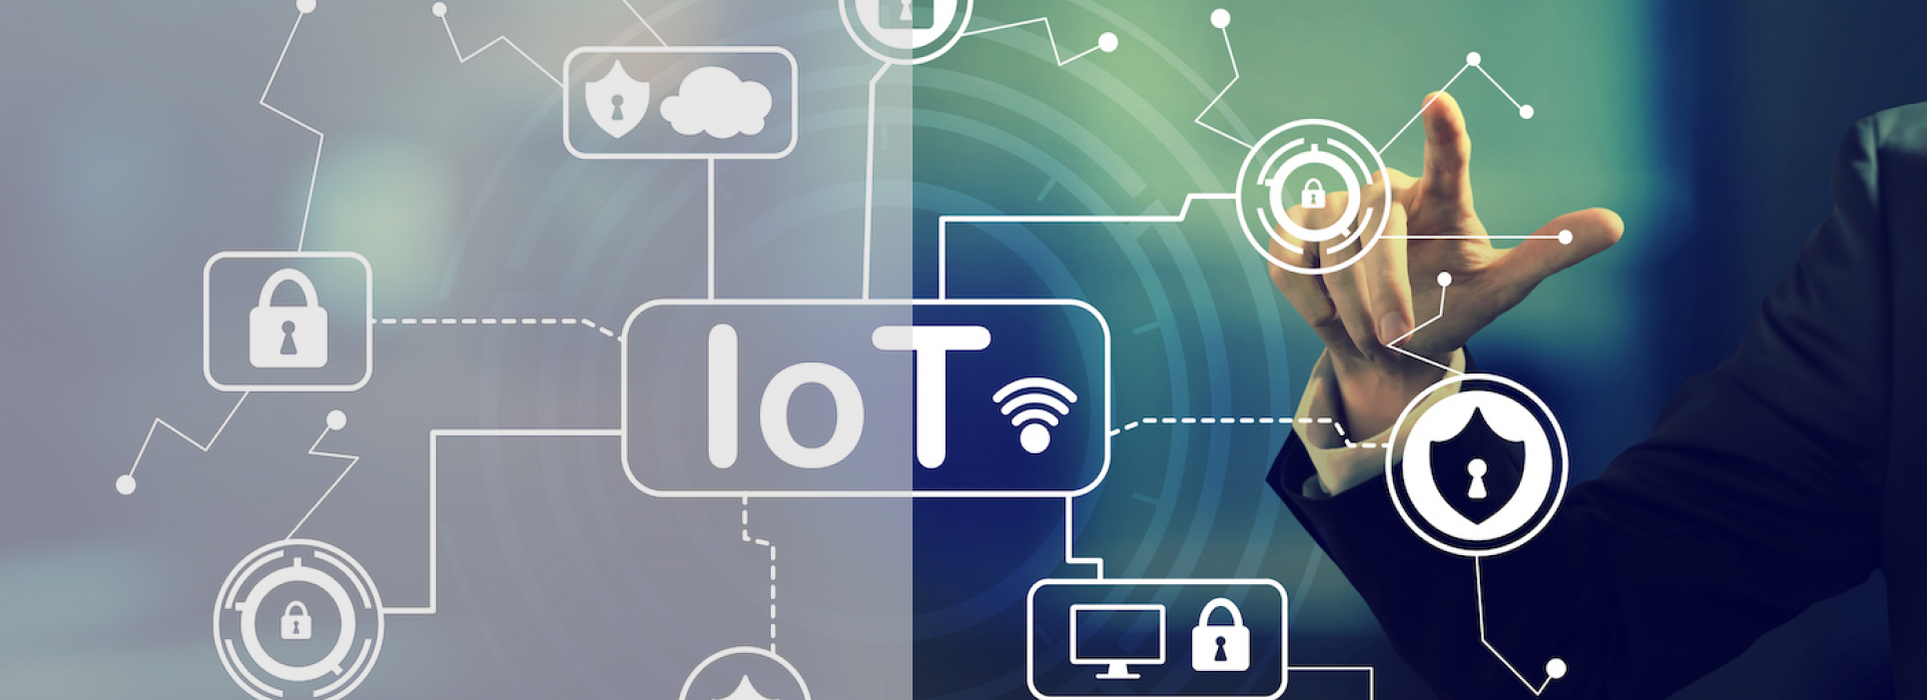 IoT Technology: What It Is and How It Works